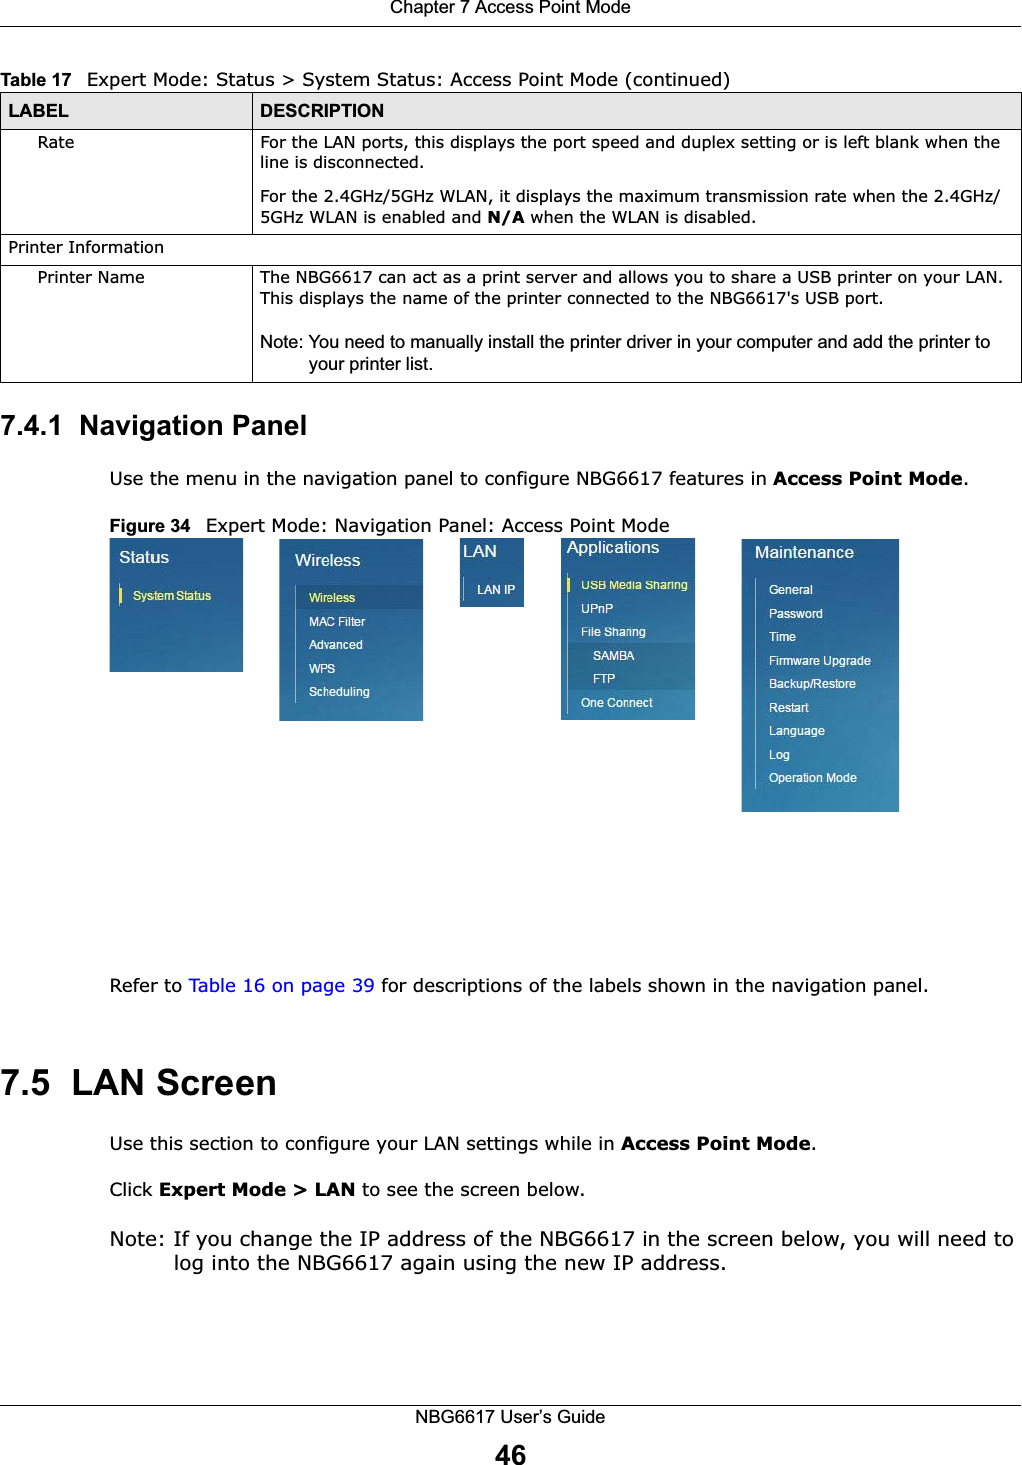 Chapter 7 Access Point ModeNBG6617 User’s Guide467.4.1  Navigation PanelUse the menu in the navigation panel to configure NBG6617 features in Access Point Mode.Figure 34   Expert Mode: Navigation Panel: Access Point Mode Refer to Table 16 on page 39 for descriptions of the labels shown in the navigation panel.7.5  LAN ScreenUse this section to configure your LAN settings while in Access Point Mode. Click Expert Mode &gt; LAN to see the screen below.Note: If you change the IP address of the NBG6617 in the screen below, you will need to log into the NBG6617 again using the new IP address.Rate For the LAN ports, this displays the port speed and duplex setting or is left blank when the line is disconnected.For the 2.4GHz/5GHz WLAN, it displays the maximum transmission rate when the 2.4GHz/5GHz WLAN is enabled and N/A when the WLAN is disabled.Printer InformationPrinter Name The NBG6617 can act as a print server and allows you to share a USB printer on your LAN. This displays the name of the printer connected to the NBG6617&apos;s USB port.Note: You need to manually install the printer driver in your computer and add the printer to your printer list.Table 17   Expert Mode: Status &gt; System Status: Access Point Mode (continued) LABEL DESCRIPTION